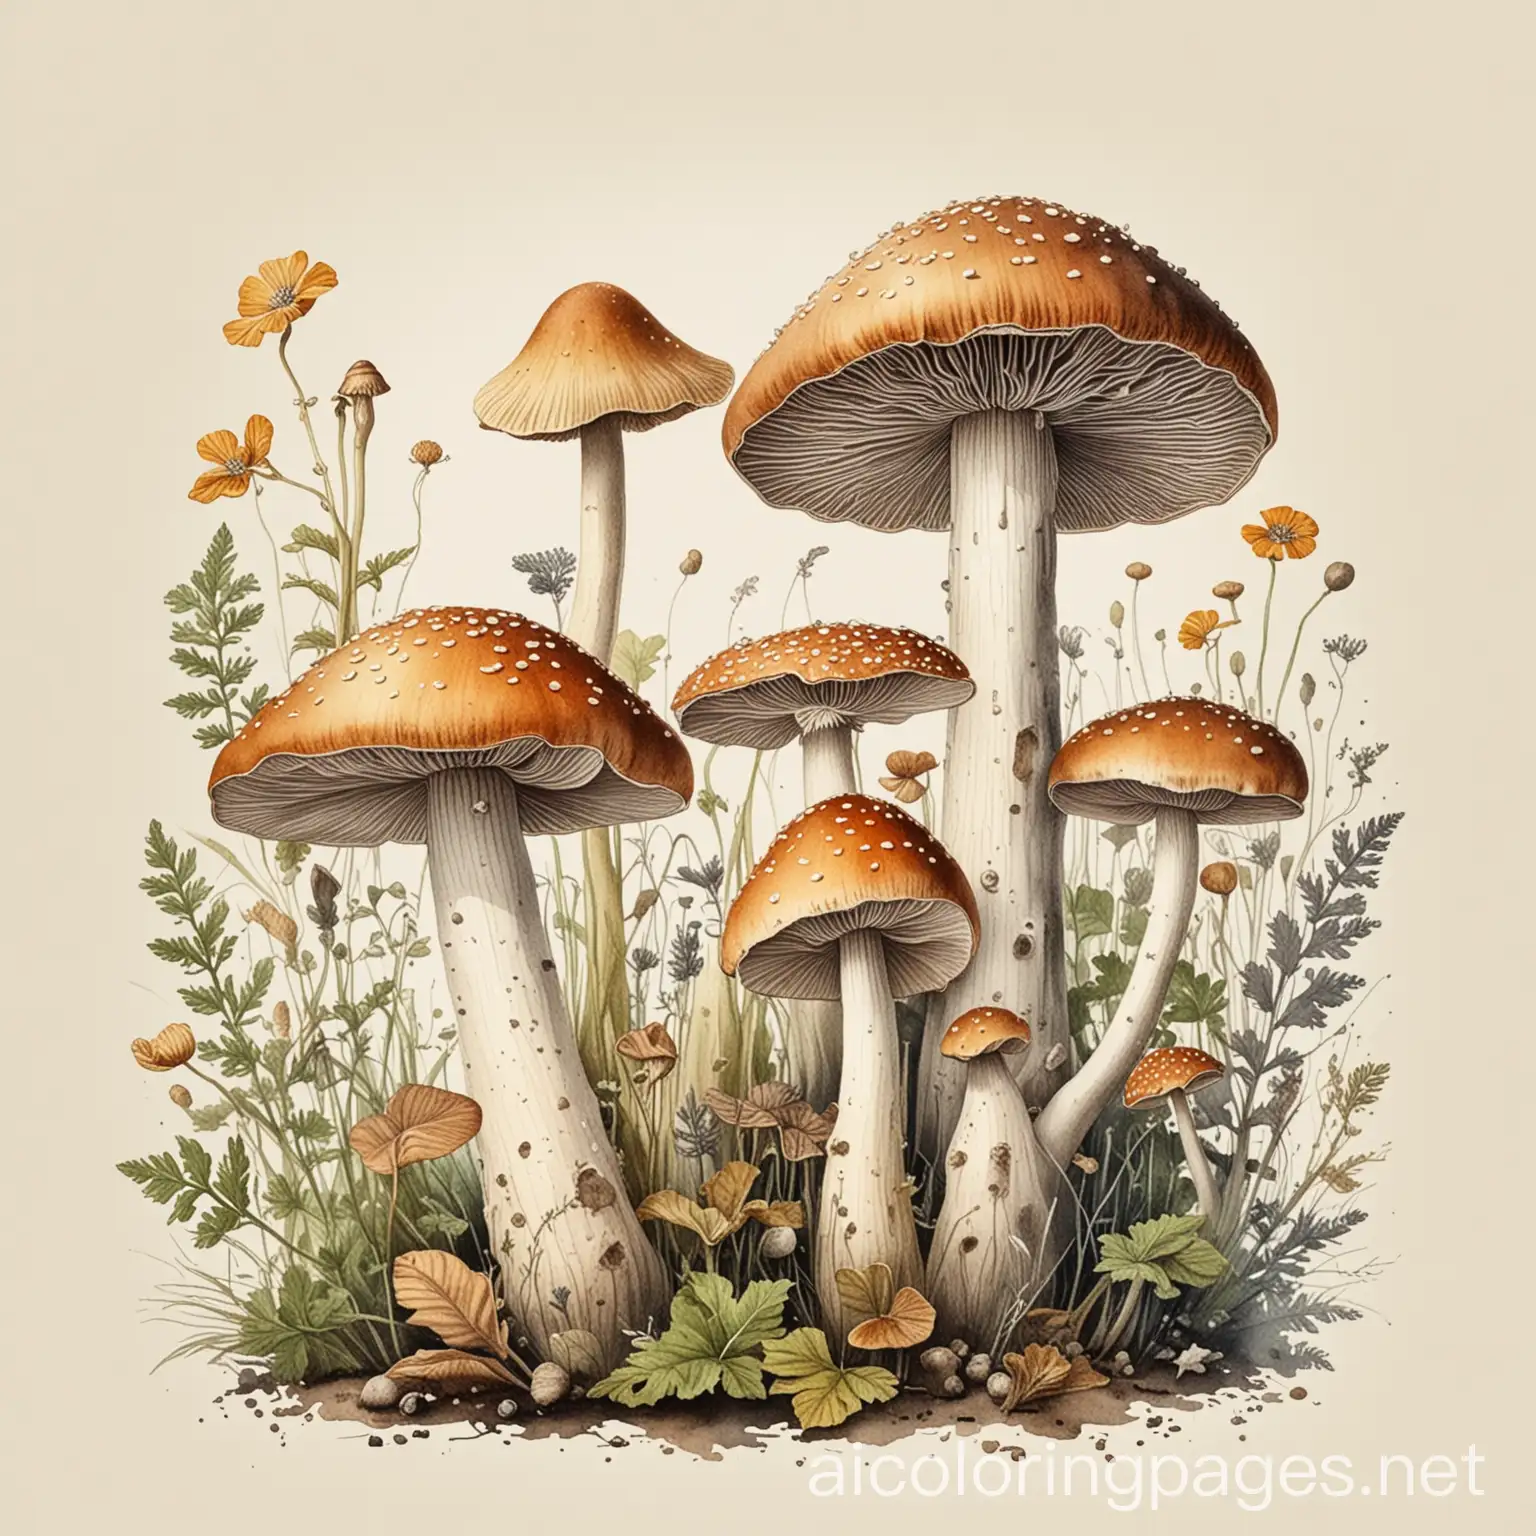 Stunning Vintage Mushrooms Watercolor Illustration, Coloring Page, black and white, line art, white background, Simplicity, Ample White Space. The background of the coloring page is plain white to make it easy for young children to color within the lines. The outlines of all the subjects are easy to distinguish, making it simple for kids to color without too much difficulty